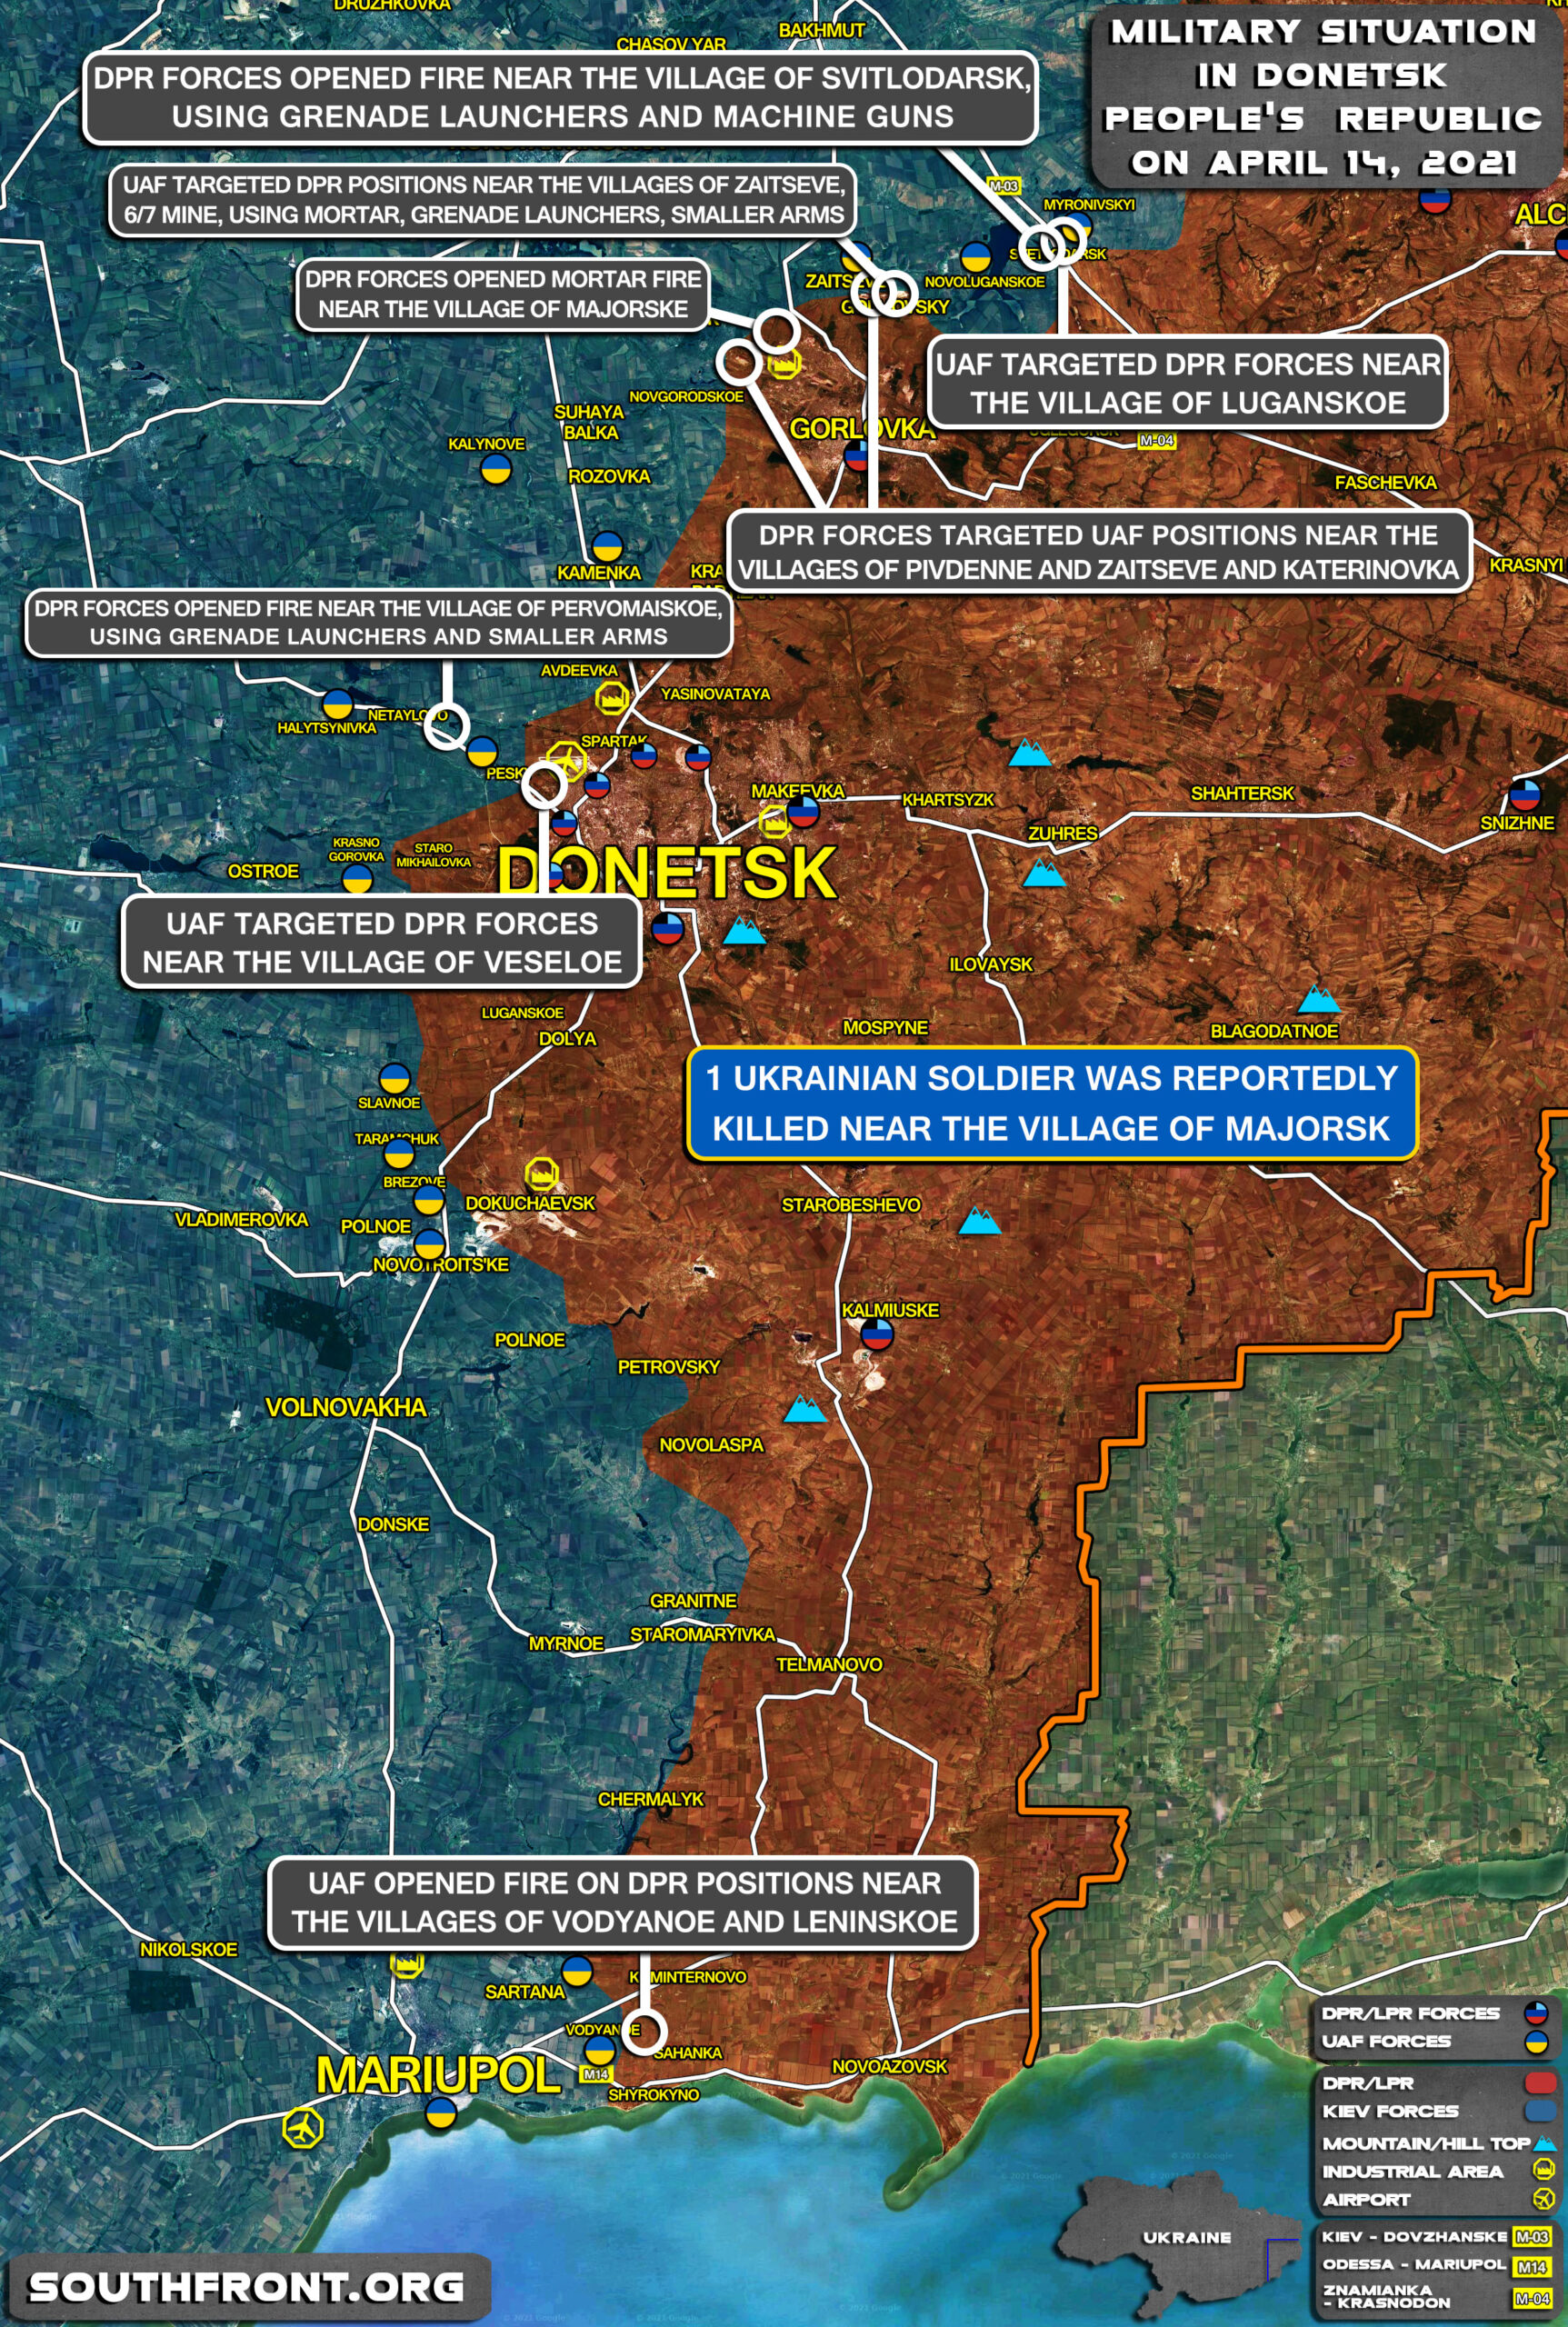 Military Situation In Donetsk People's Republic On April 14, 2021 (Map Update)